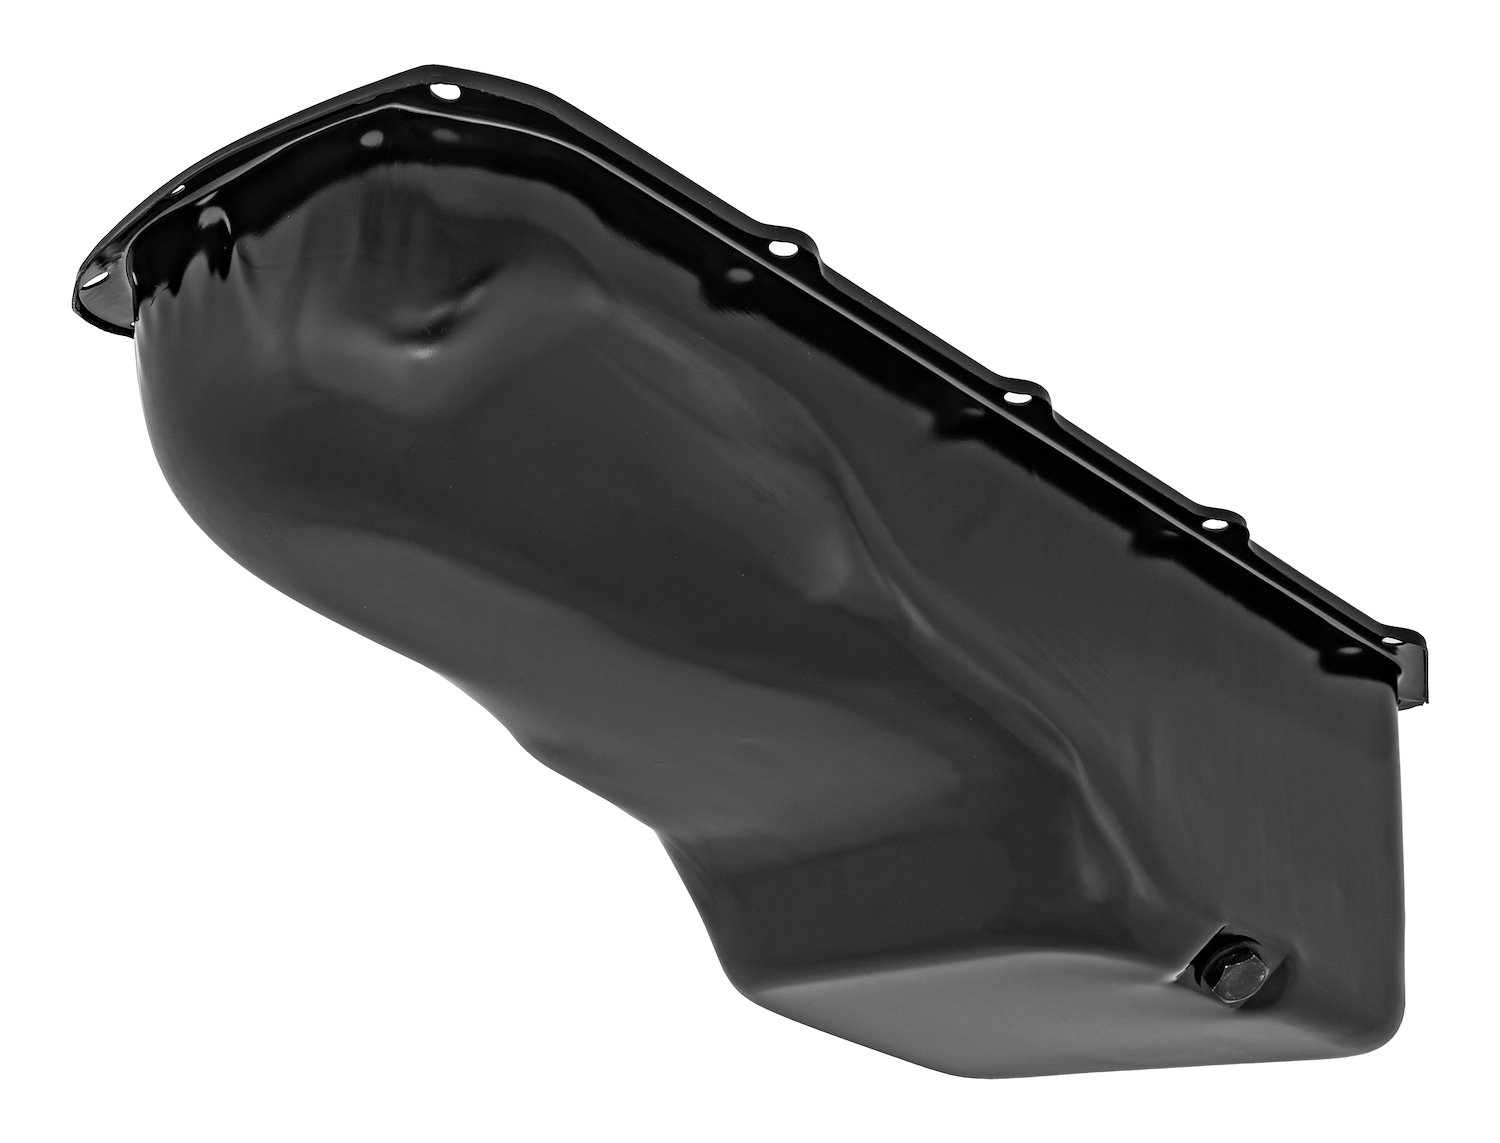 Stock-Style Replacement Oil Pan for 1959-1981 Pontiac 265-455 V8 [Black]